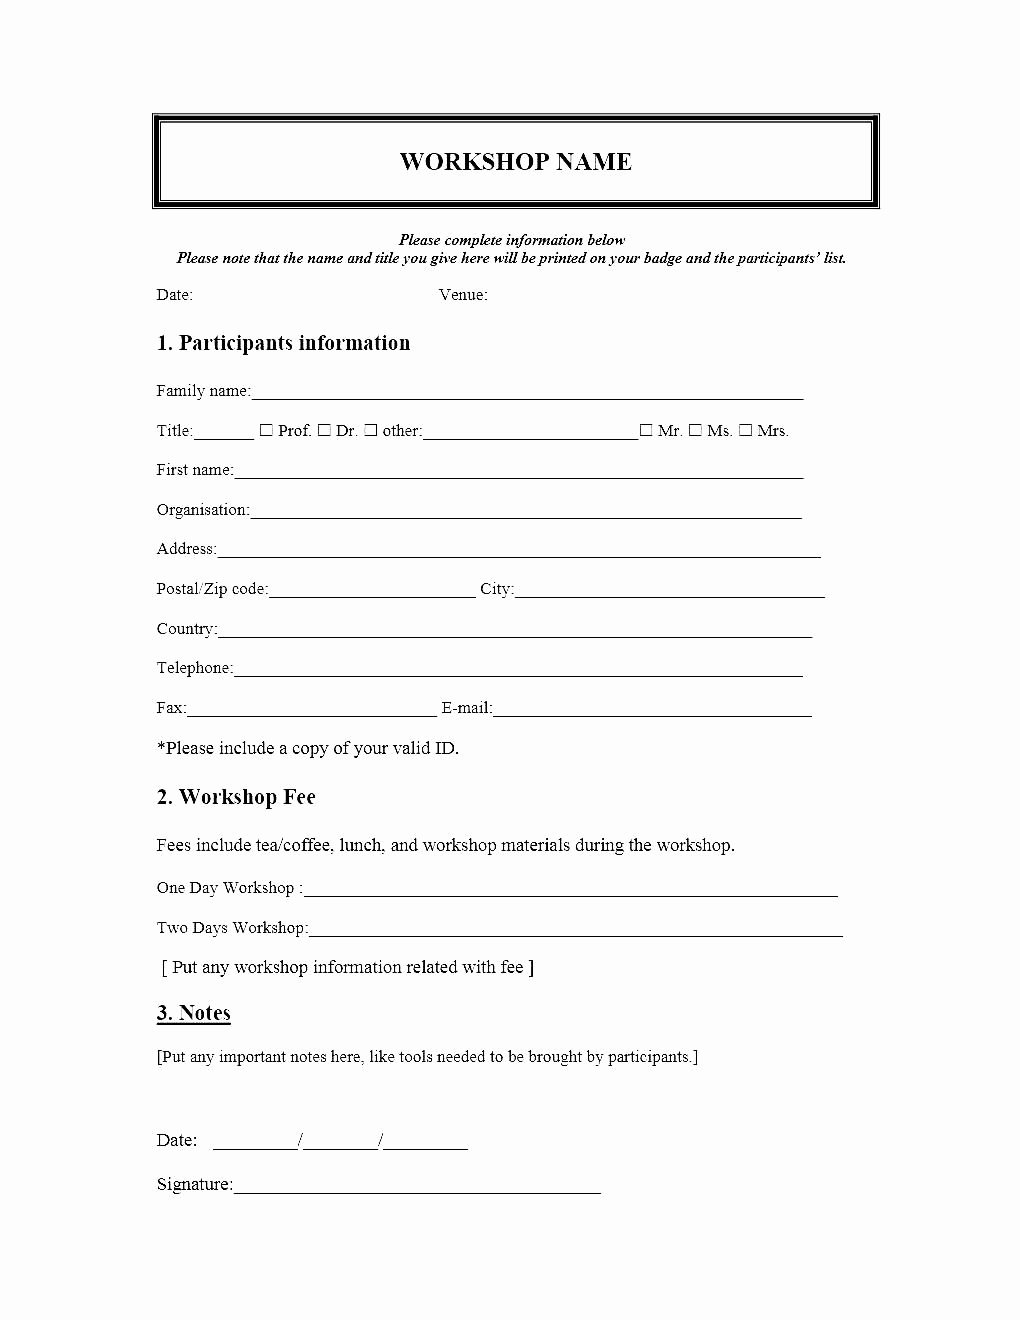 Conference Registration form Template Word Inspirational event Registration form Template Microsoft Word